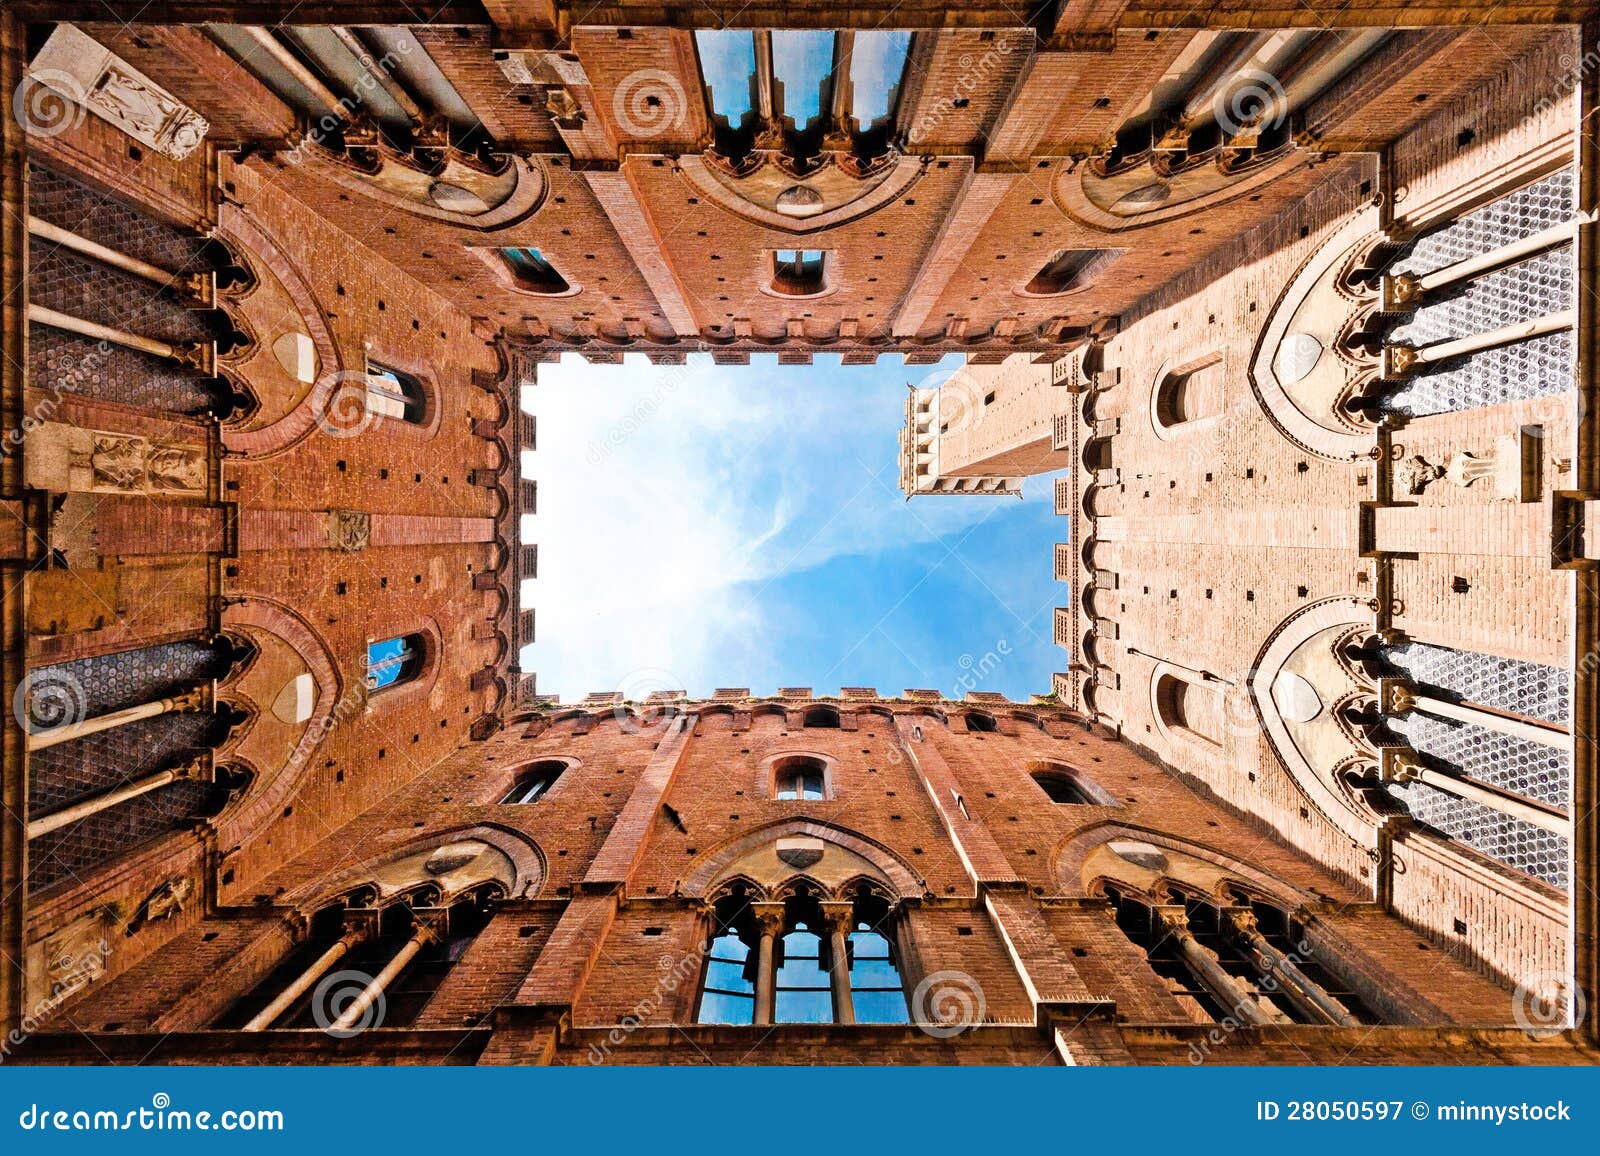 wide angle view of torre del mangia, siena, italy